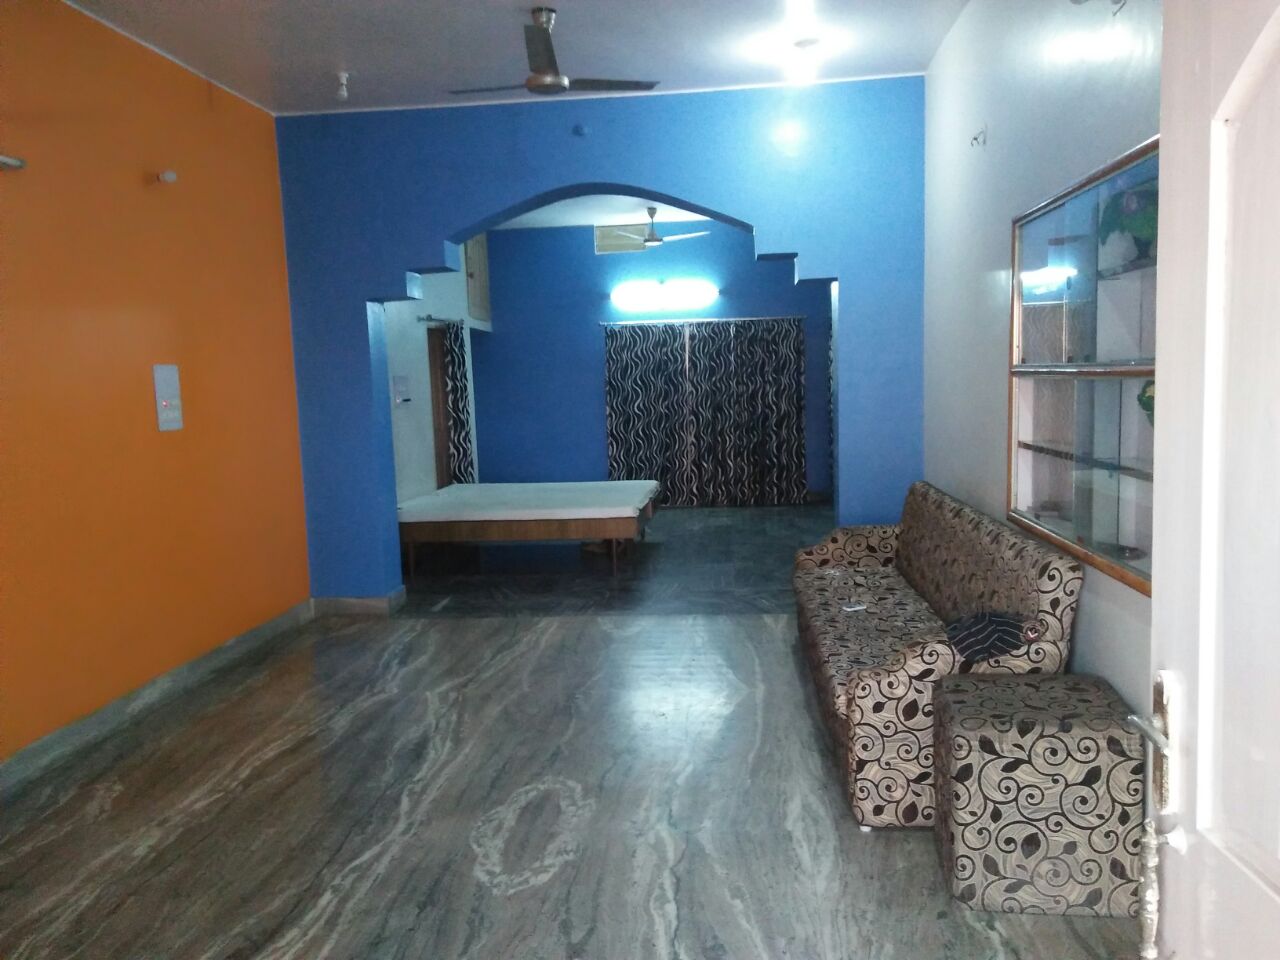 GUEST HOUSE IN GOLA ROAD PATNA